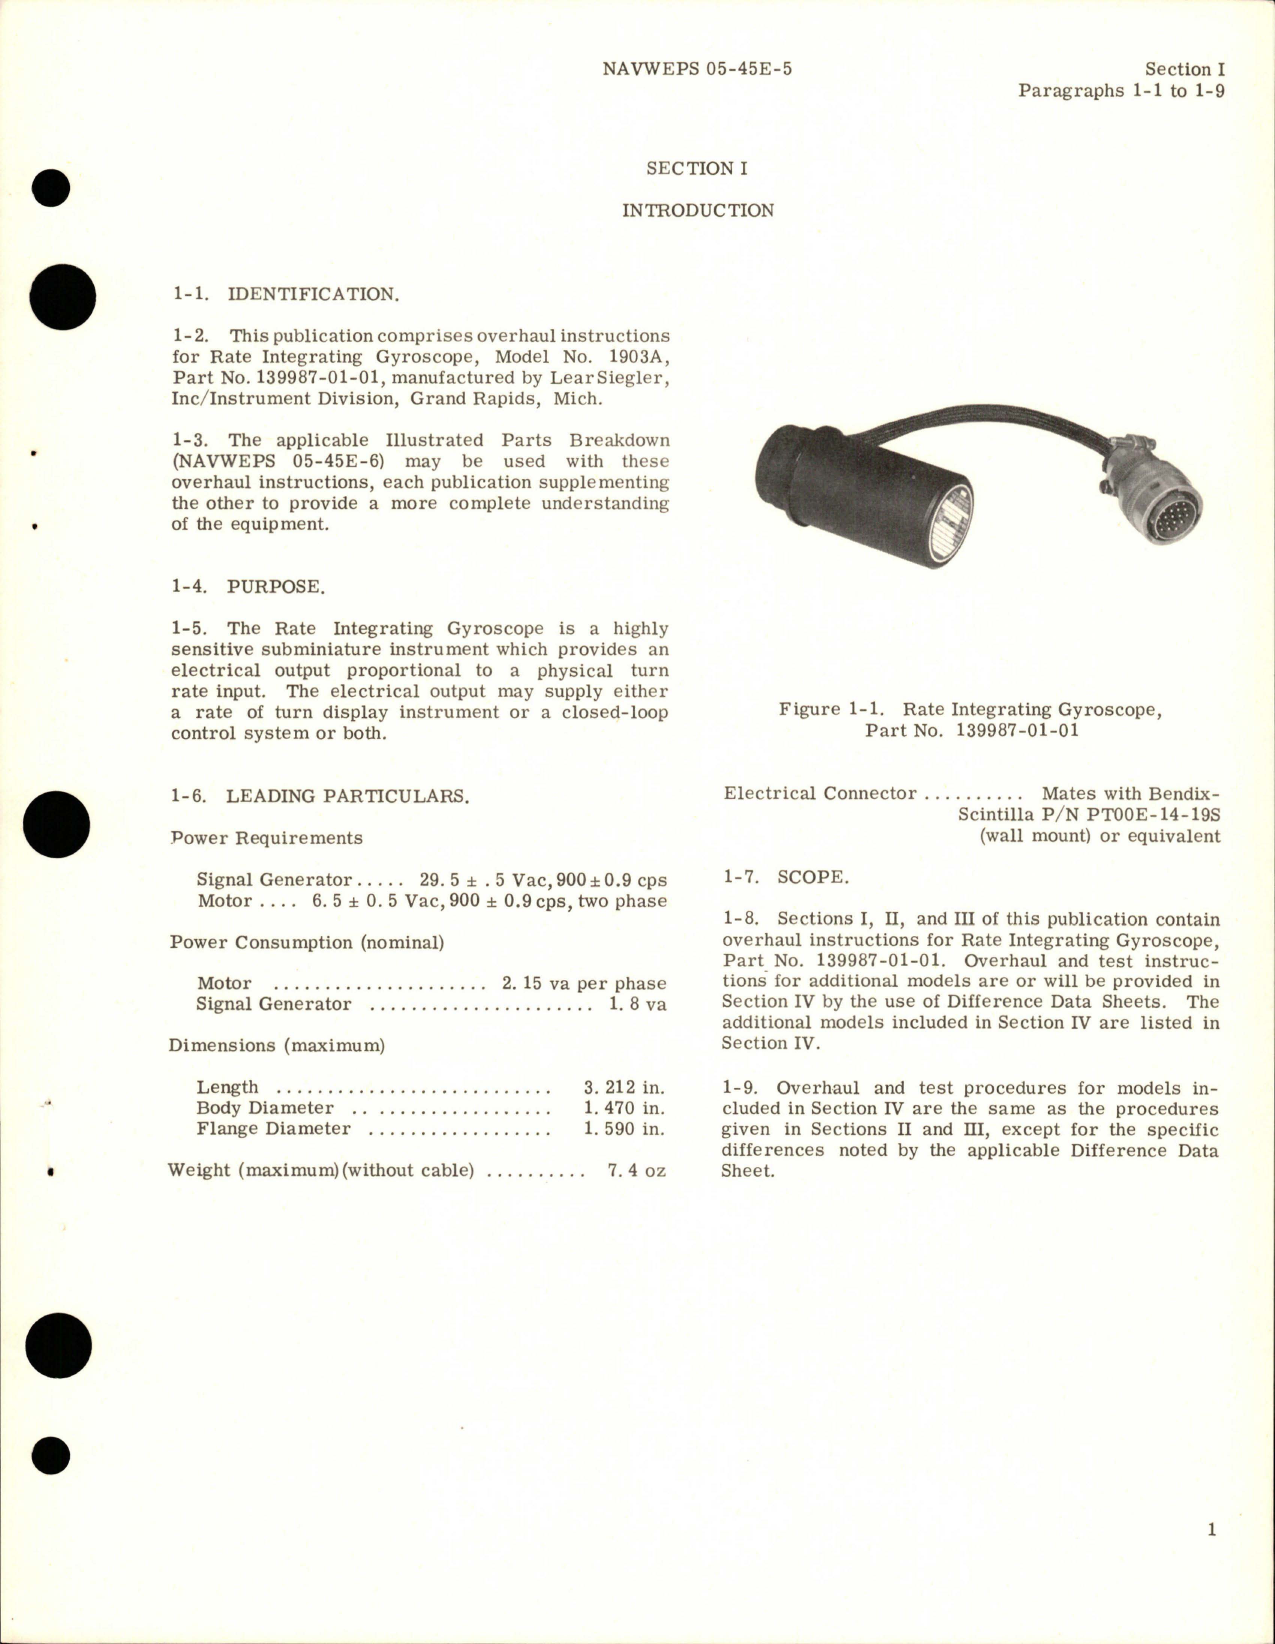 Sample page 5 from AirCorps Library document: Overhaul Instructions for Rate Integrating Gyroscope - Model 1903A